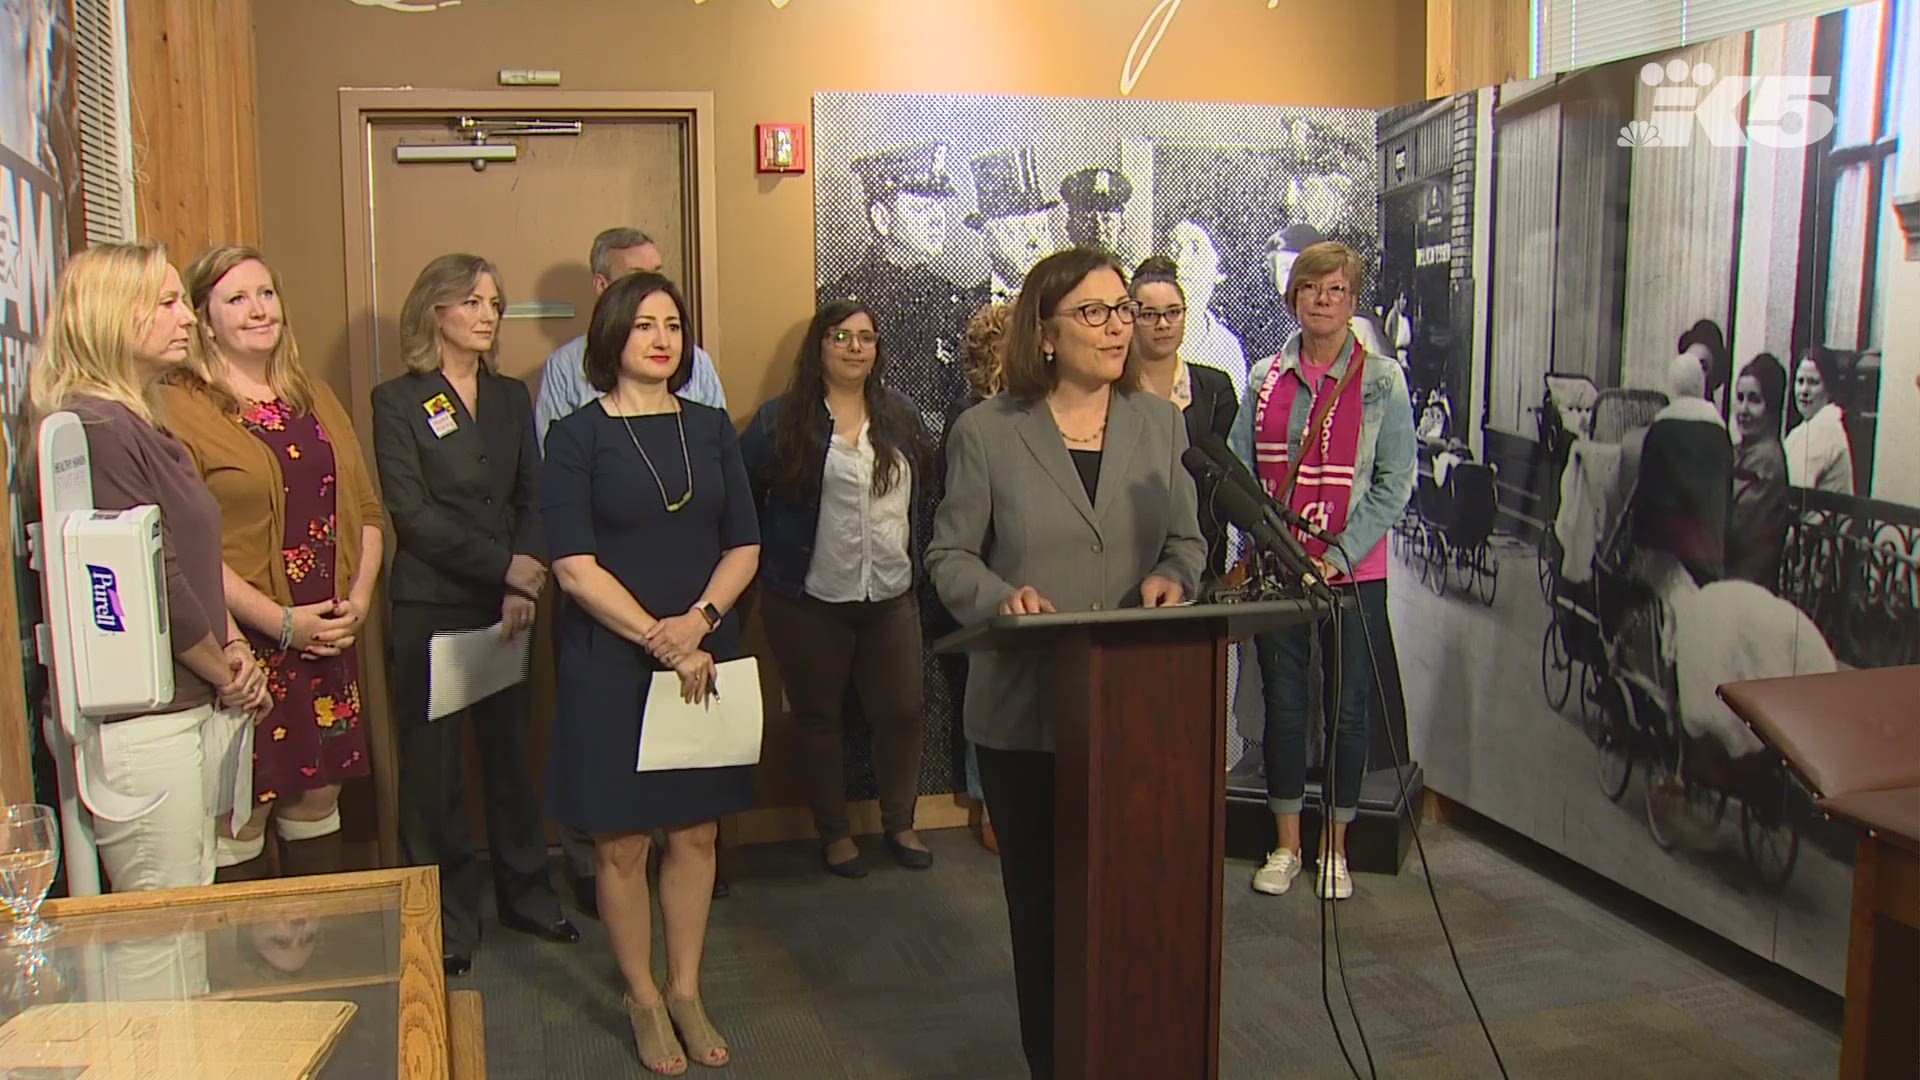 During a news conference in Seattle on Tuesday, Washington Congresswoman Suzan DelBene urged fellow lawmakers to pass the Women’s Health Protection Act, which prevents states from imposing certain restrictions on abortions.